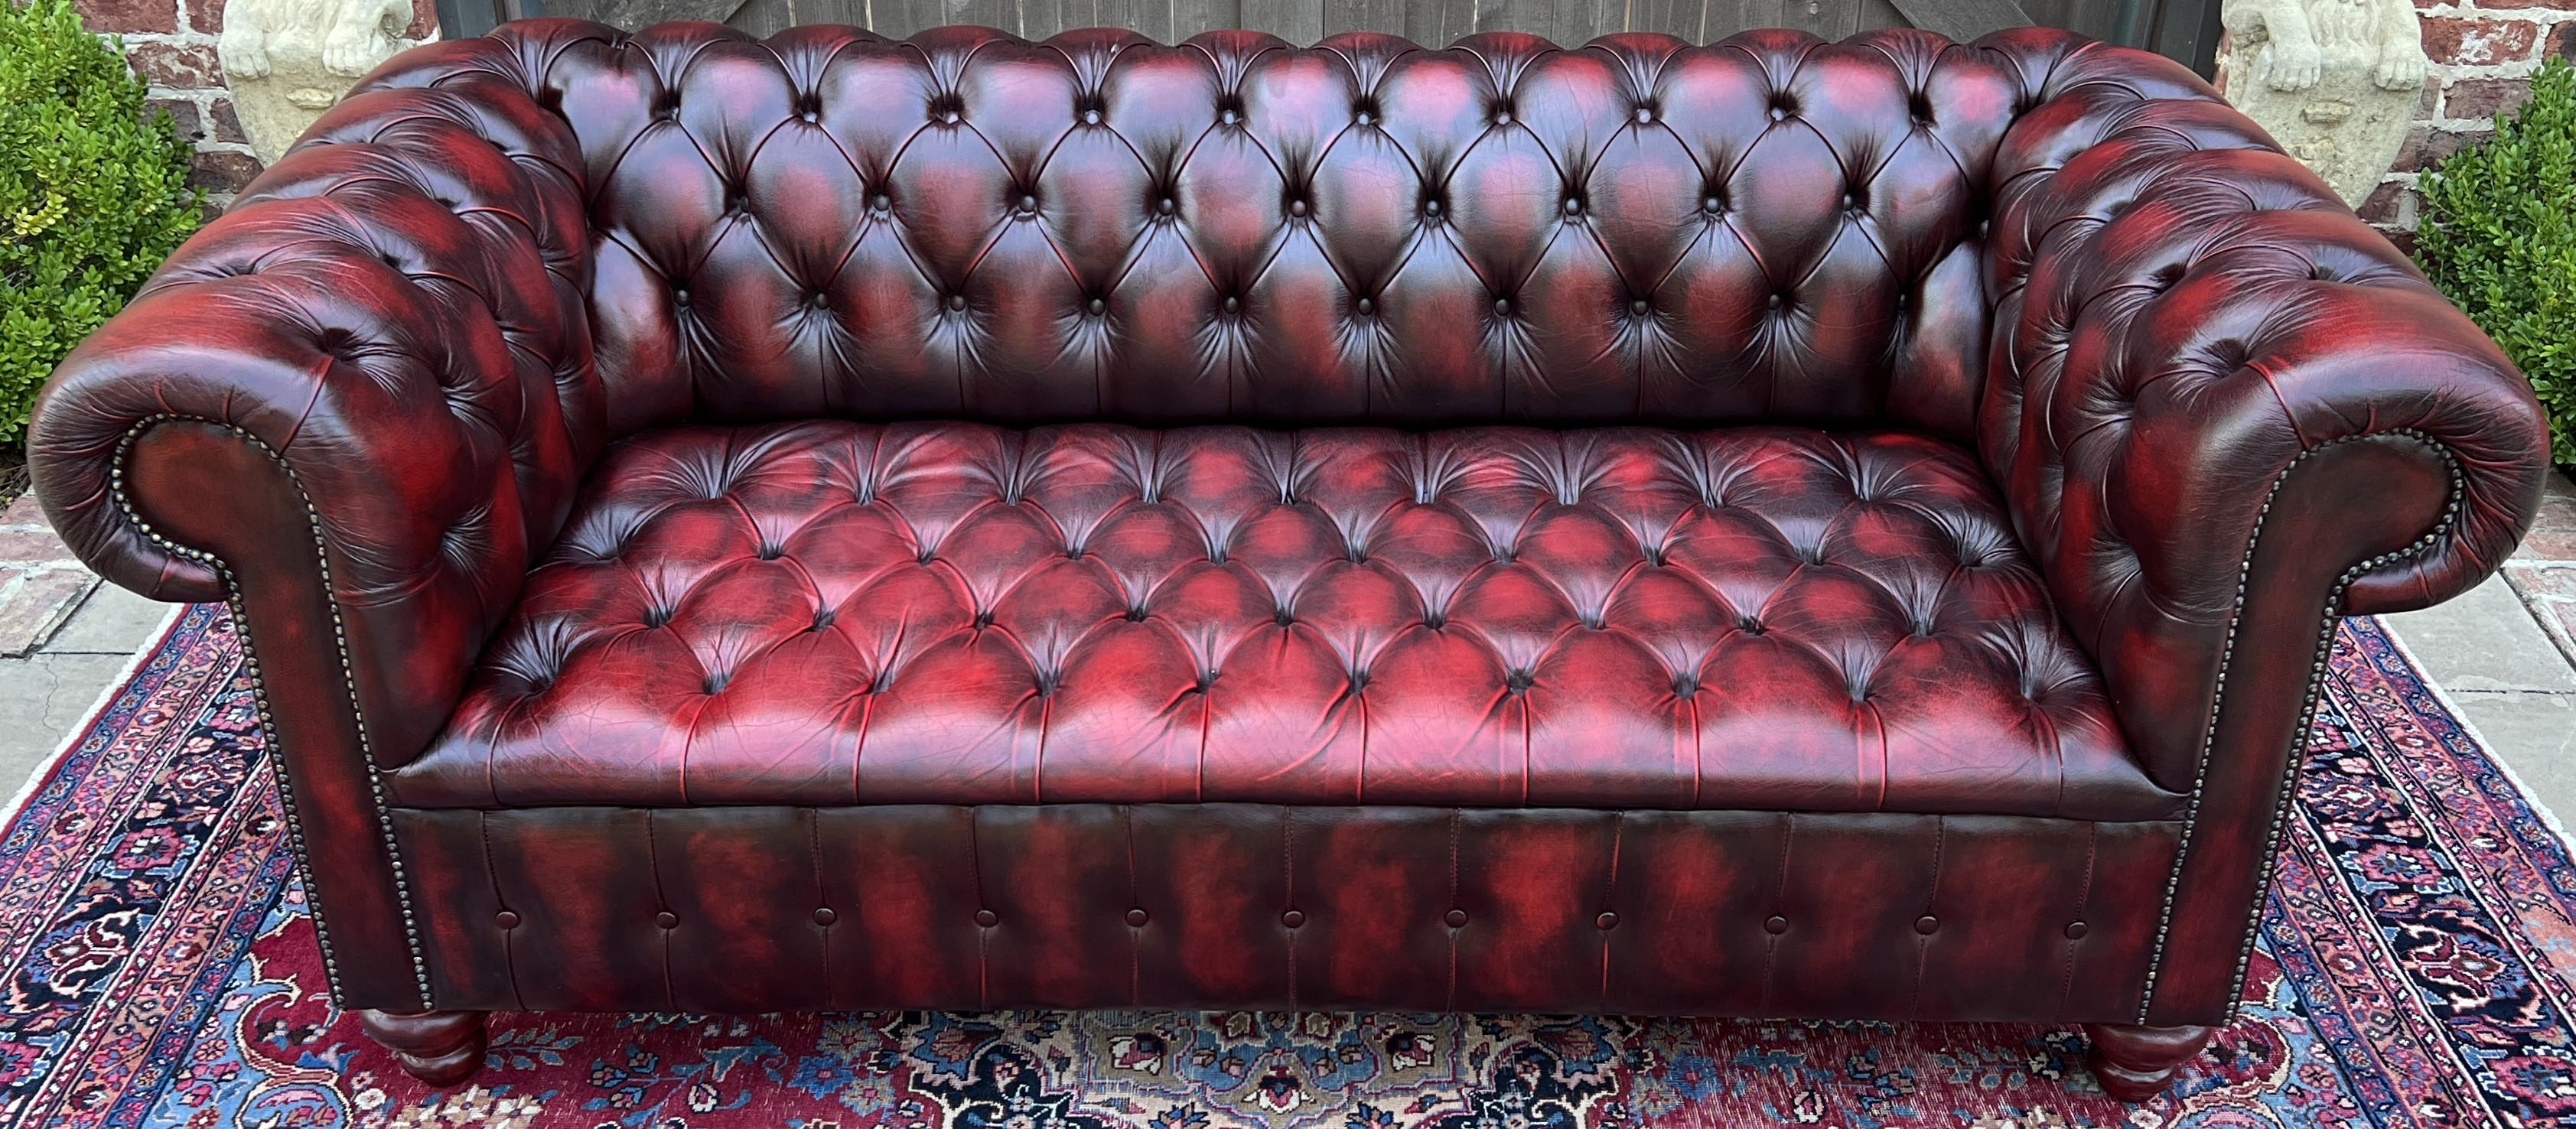 20th Century Vintage English Chesterfield Sofa Leather Tufted Seat Oxblood Red Mid-Century #1